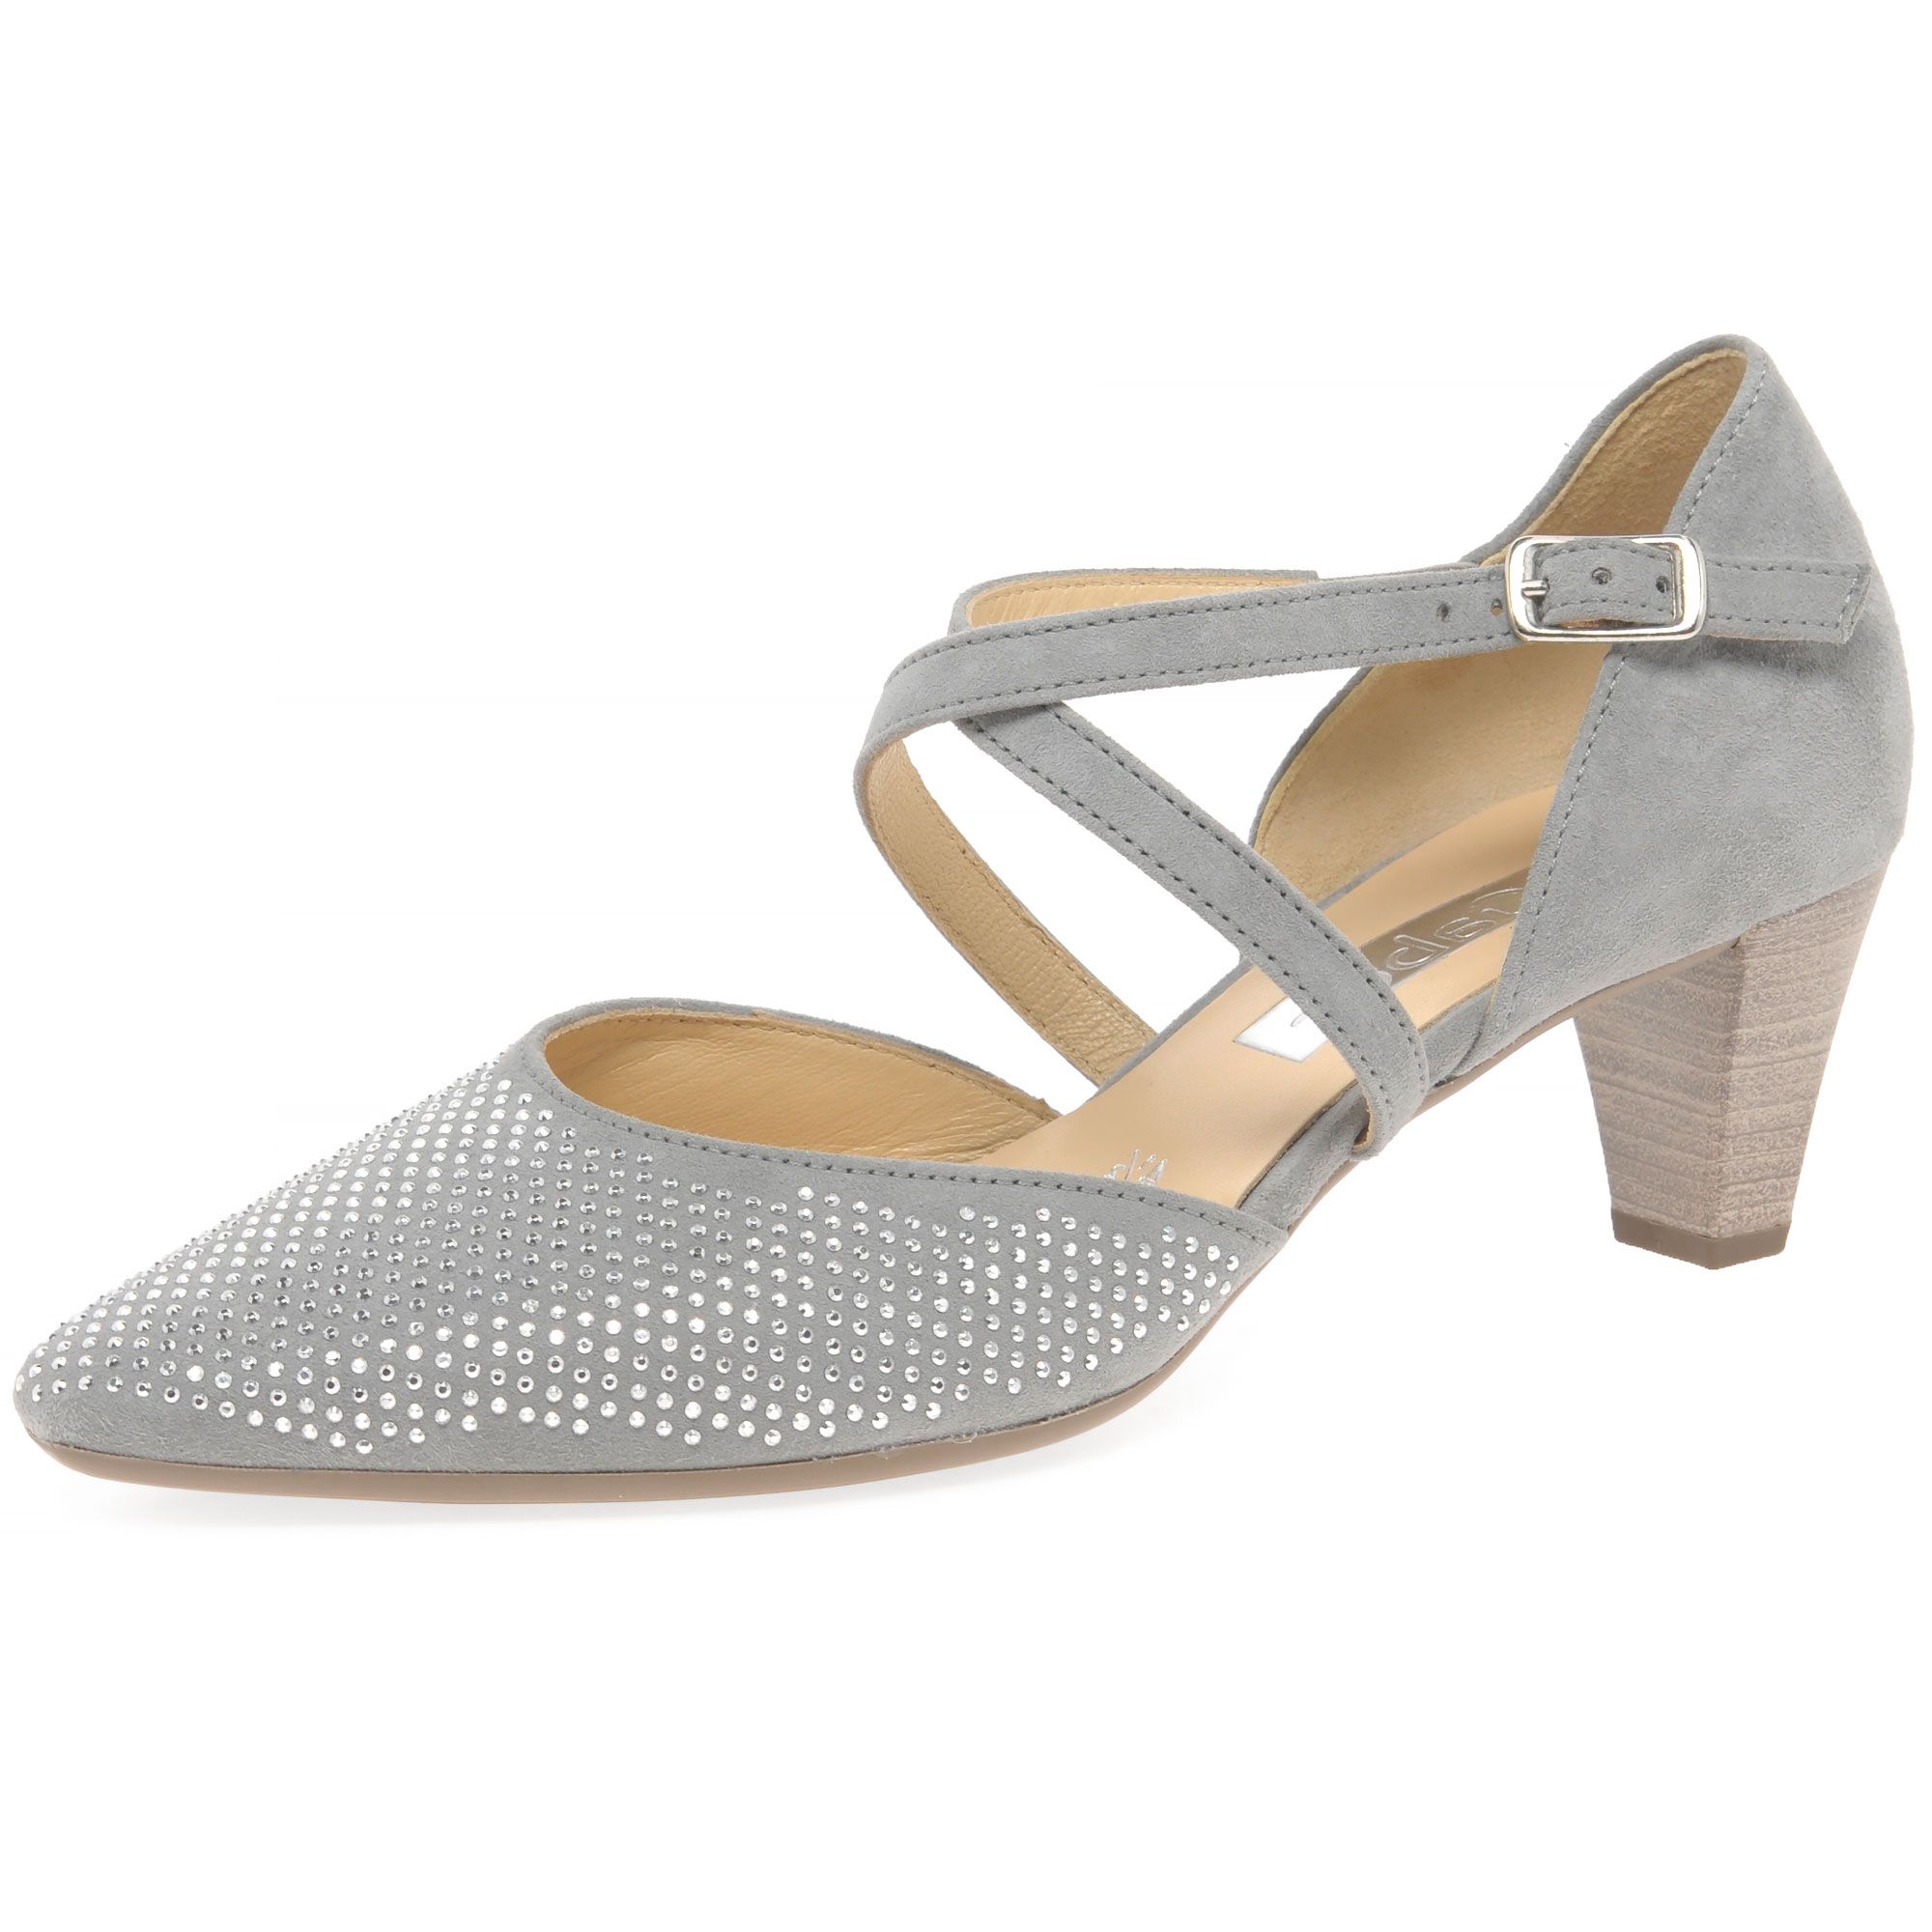 Gabor Frederica Cross Strap Court Shoes, Stone